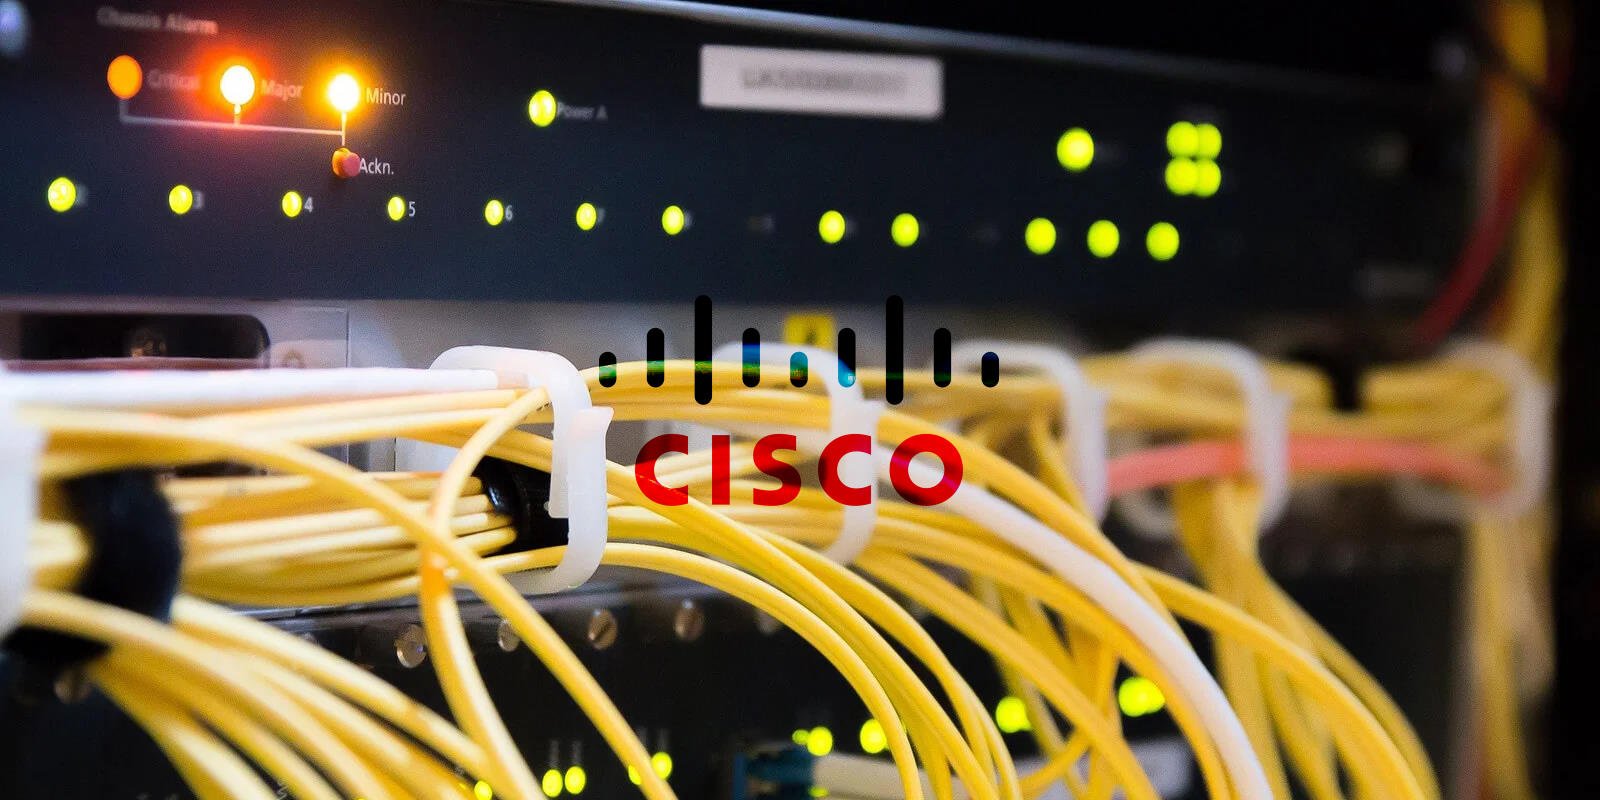 CEO charged with sale of counterfeit Cisco devices to govt, health orgs